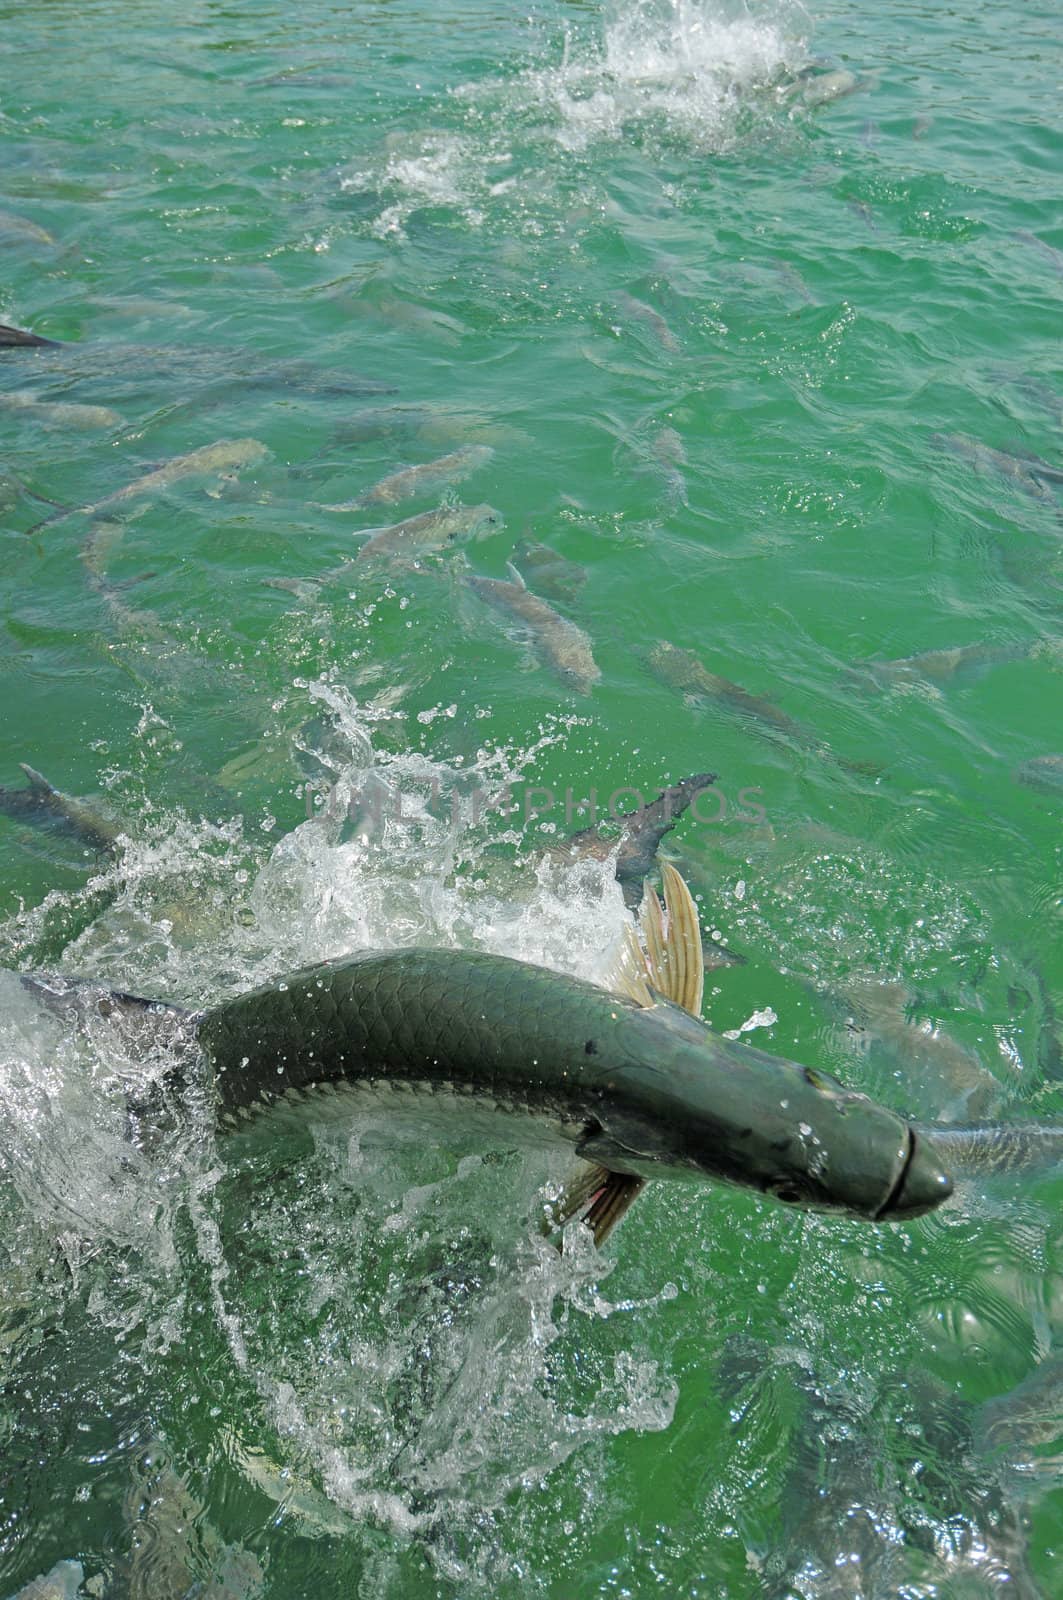 Tarpon fish jumping out of water in the Atlantic Ocean off of the Florida coast